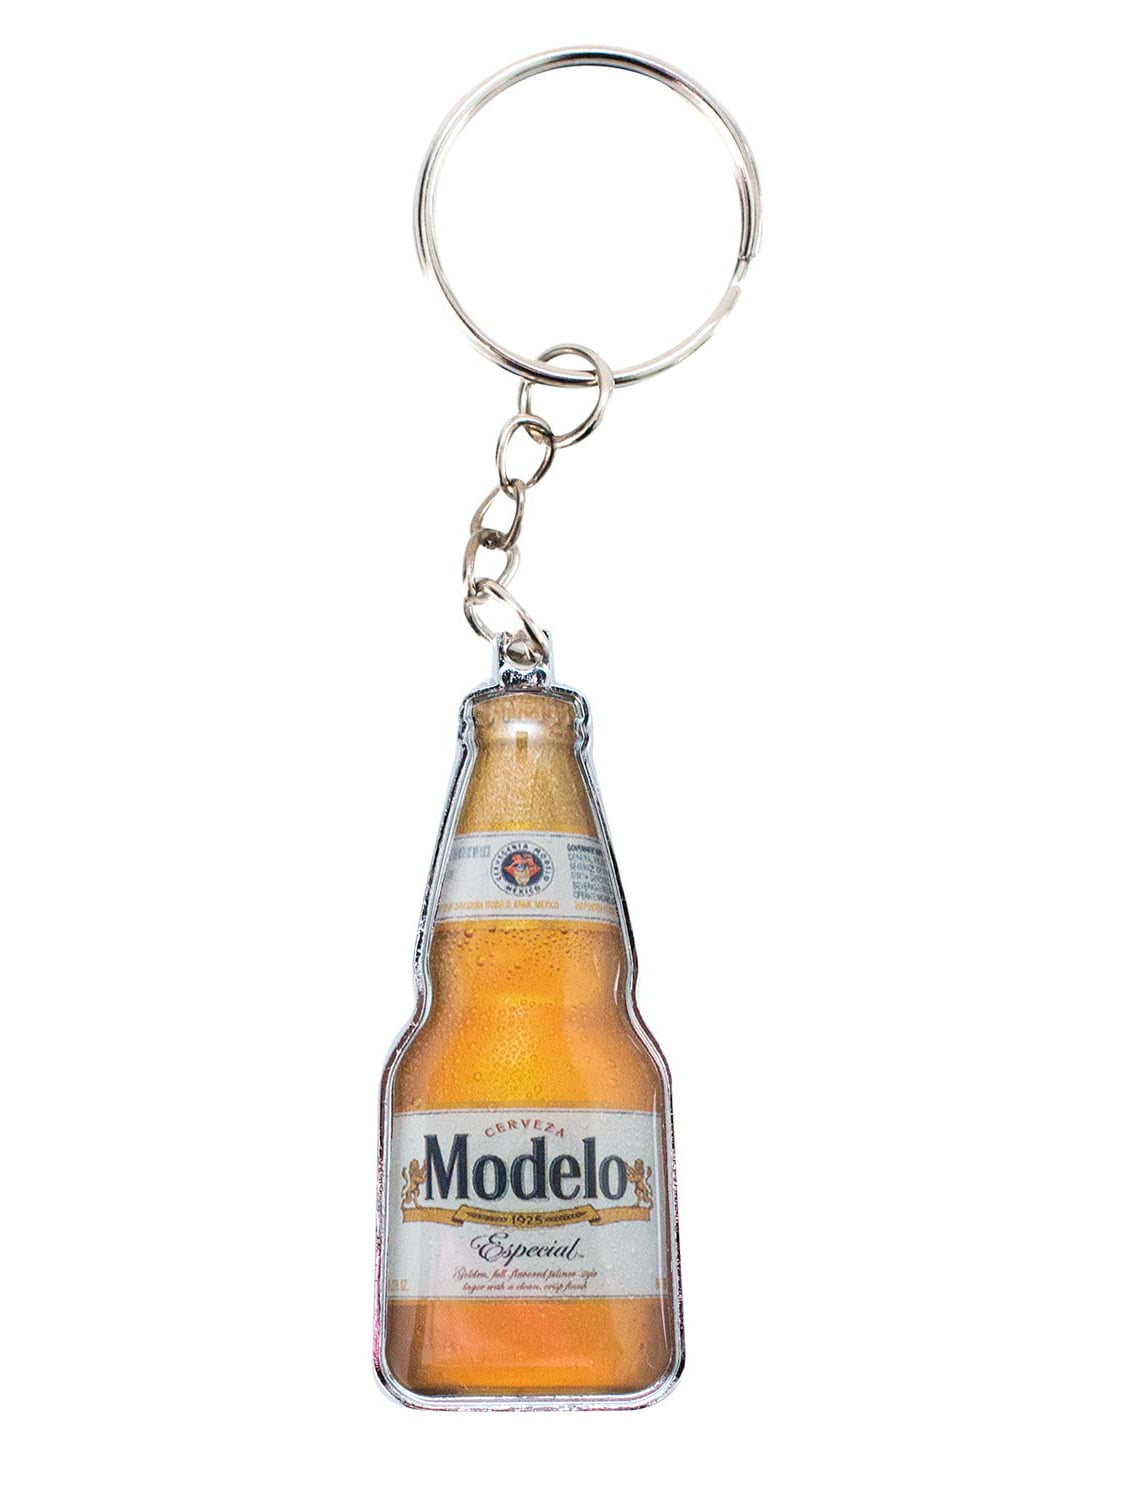 10 MODELO ESPECIAL Beer Gold colored Keychains 